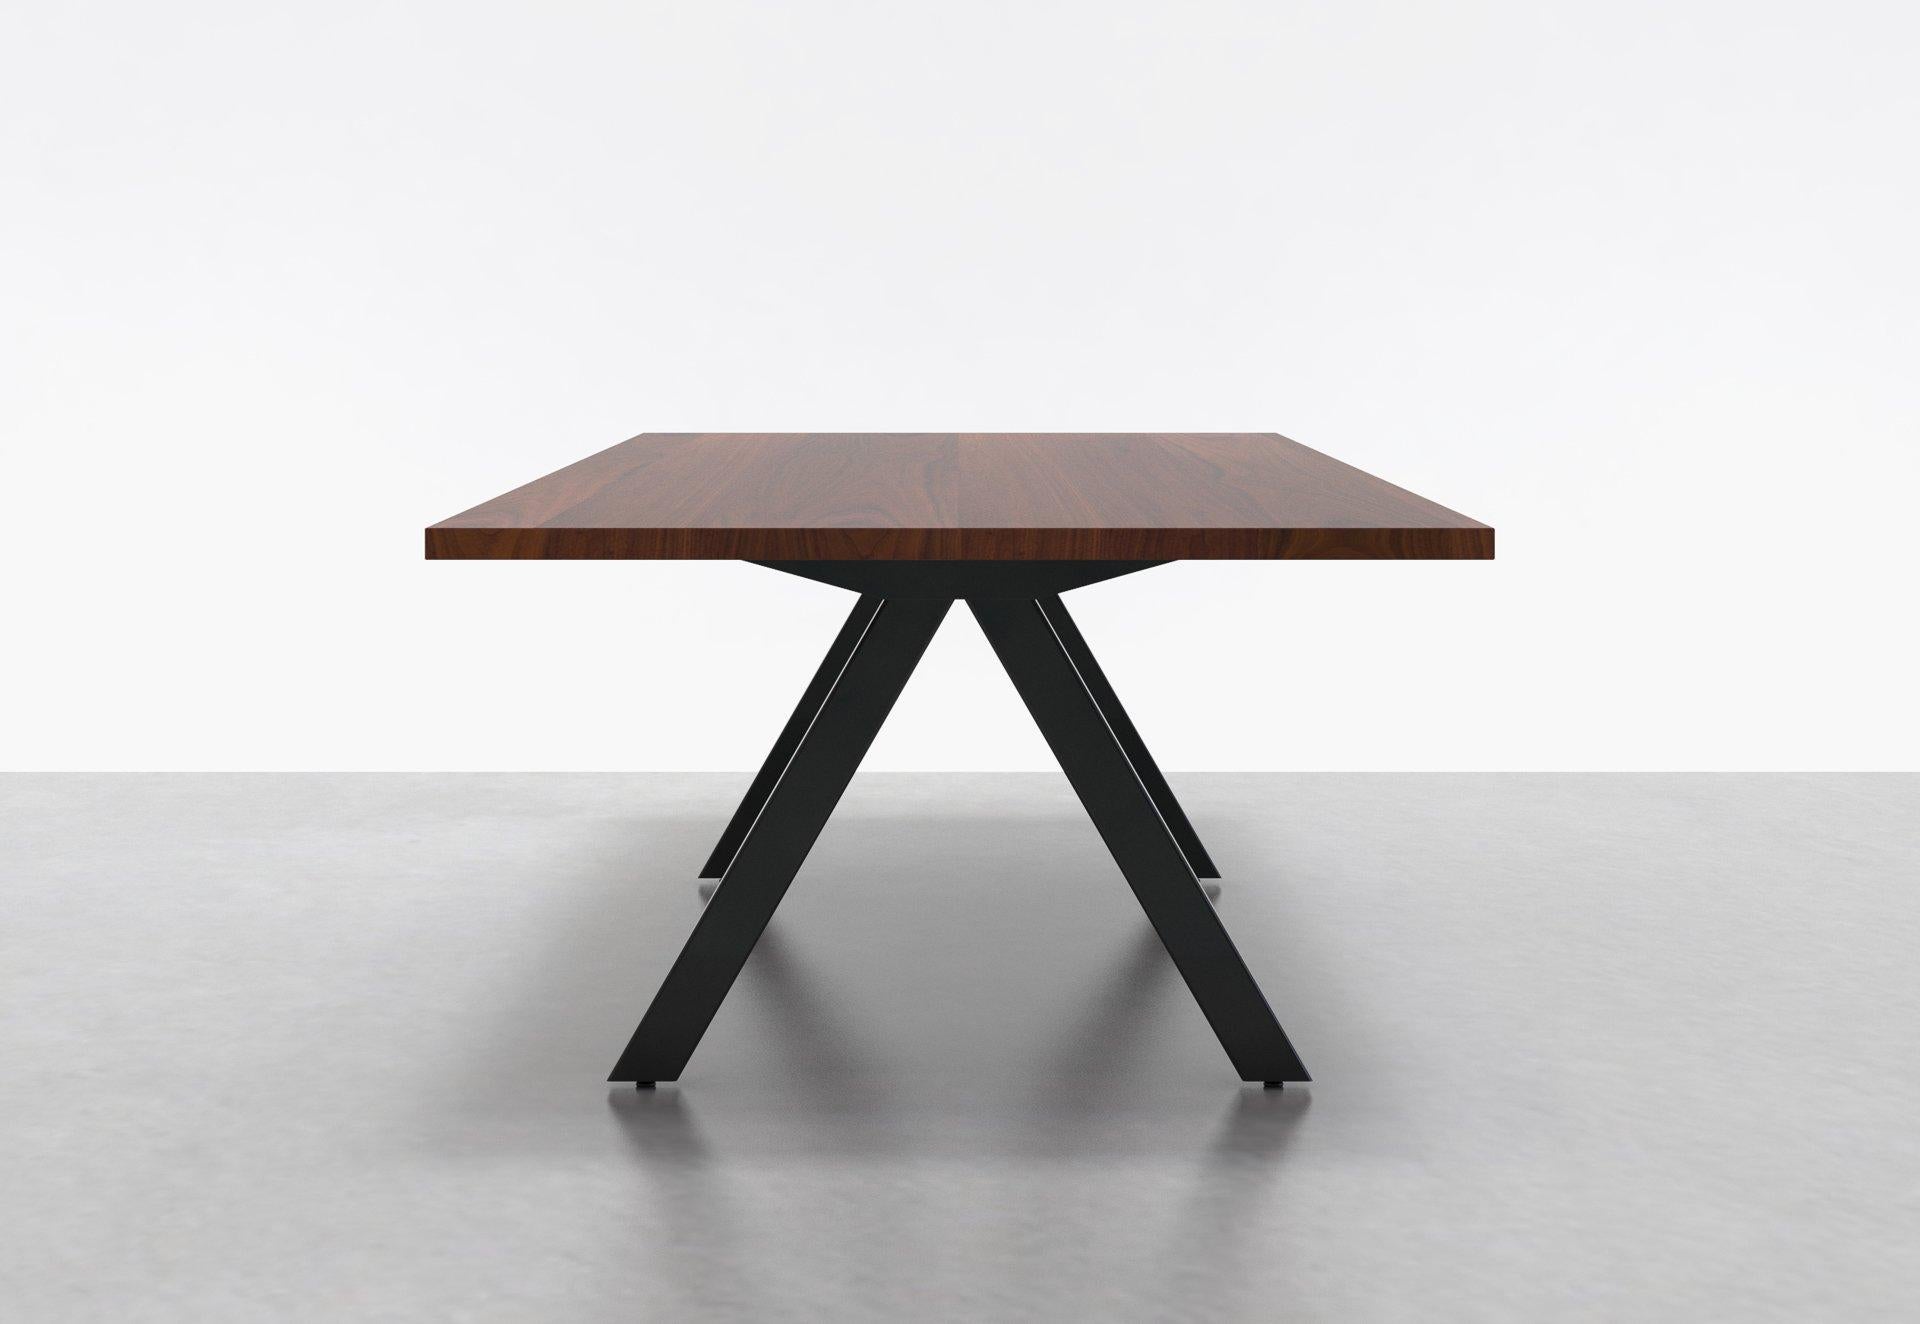 Our Split table features the original Uhuru Split base, popular for its classic proportions and versatility as a dining table, breakout or meeting table. The base is made from thicker steel tubes, creating a monolithic visual that complements its